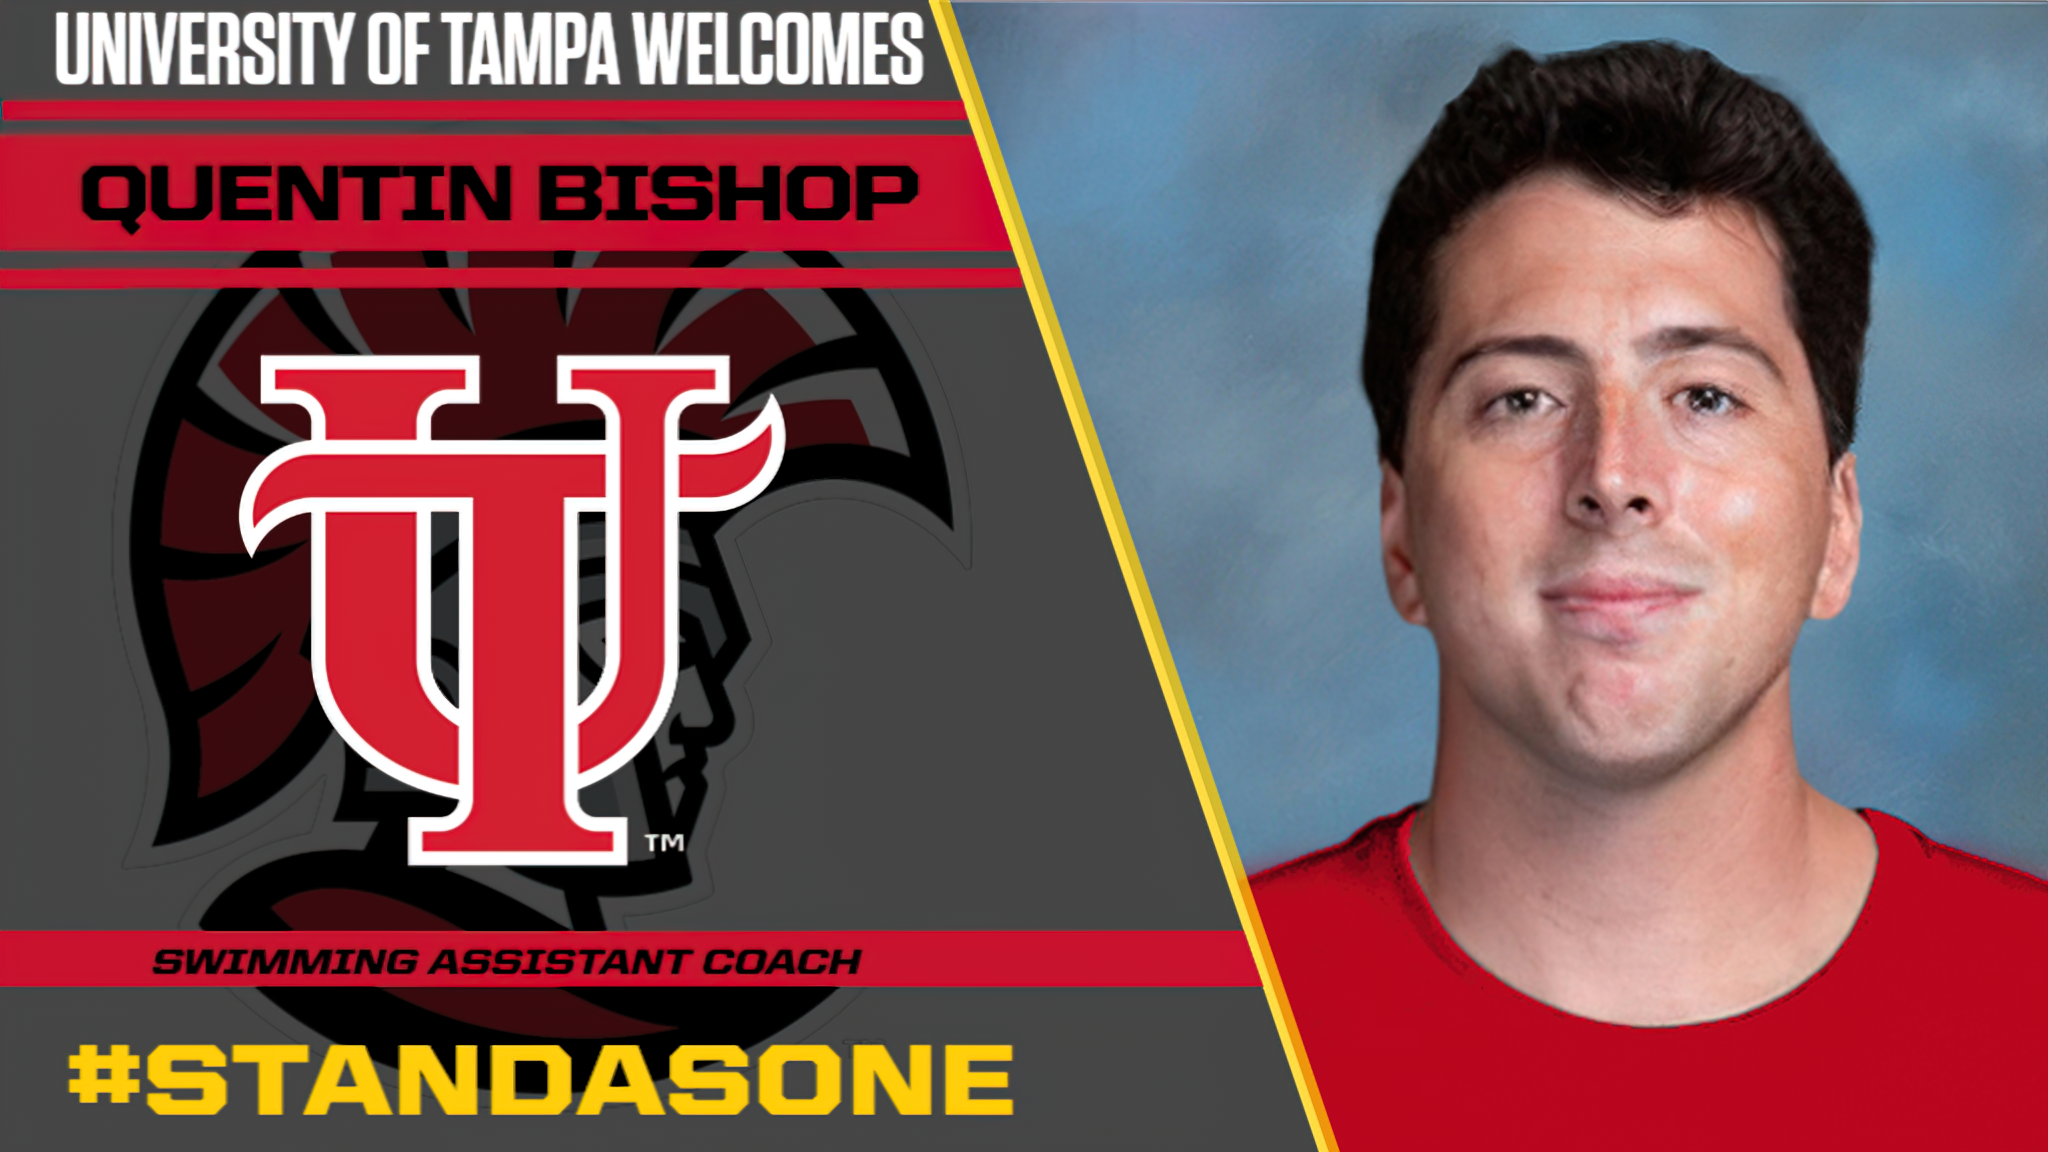 University of Tampa Assistant Swimming Coach Quentin Bishop